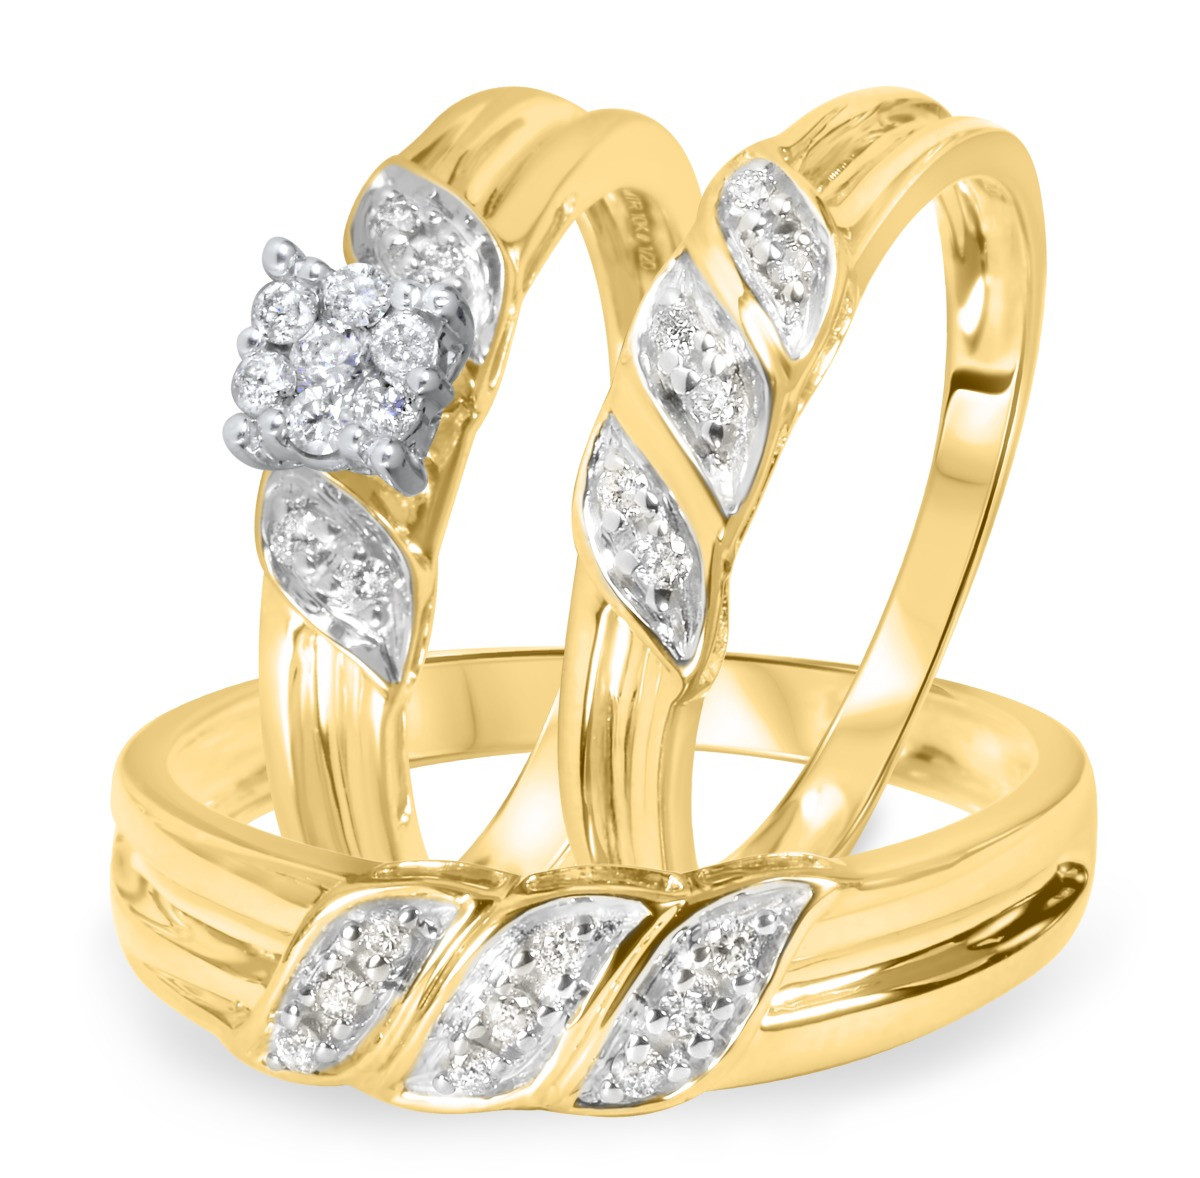 The Best Wedding Ring Trio Sets - Home, Family, Style and Art Ideas